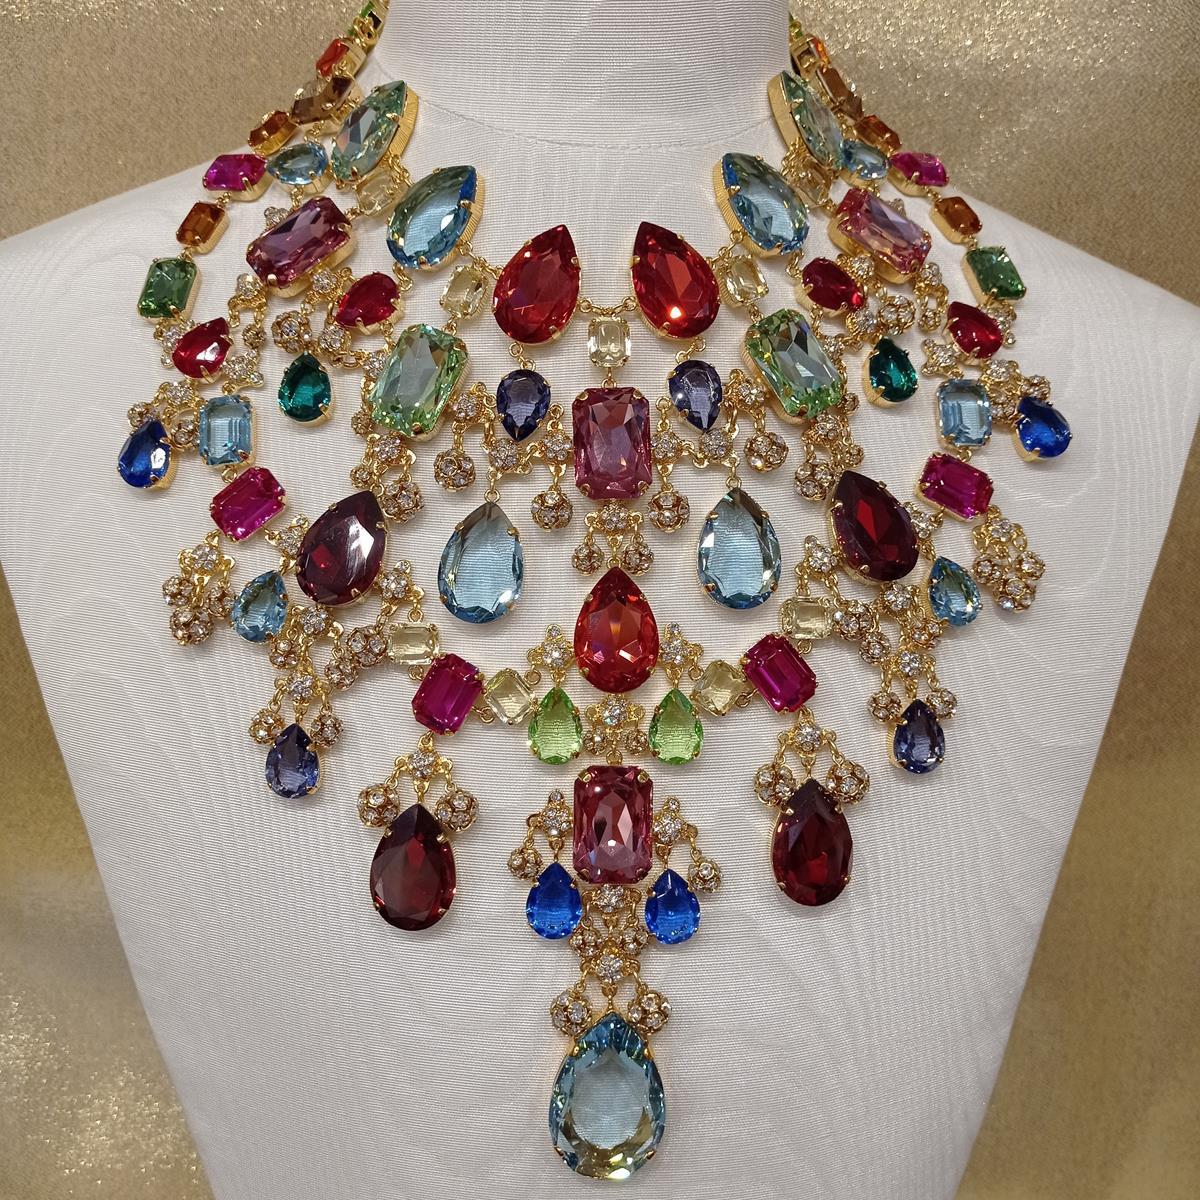 Fantastic masterpiece by Carlo Zini
One of the world greatest bijoux designers
Large collier
Stunning ramage of class colored crystals drops
Amazing color mix
18 KT, 3 micron golden brass, non allergenic
100% Artisanal work
Worldwide express